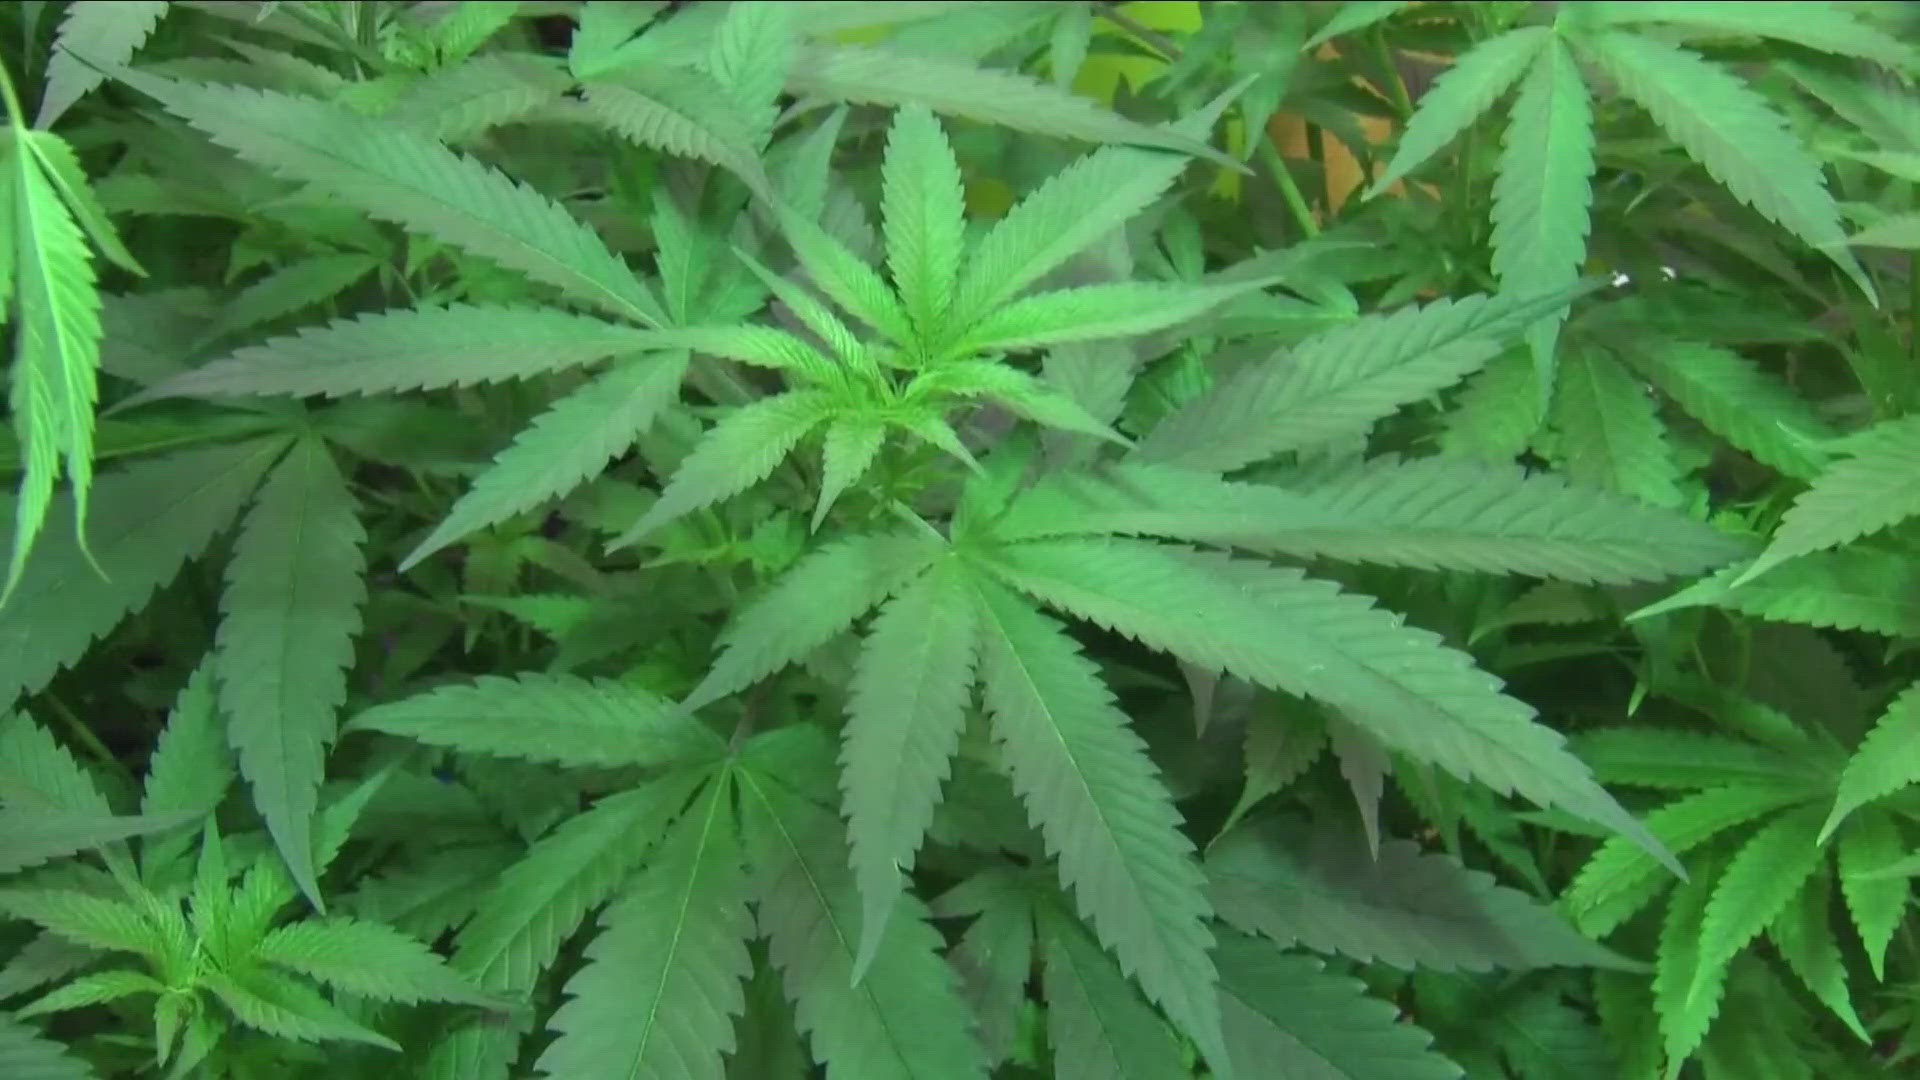 Major changes on federal restrictions placed on Marijuana could be coming soon